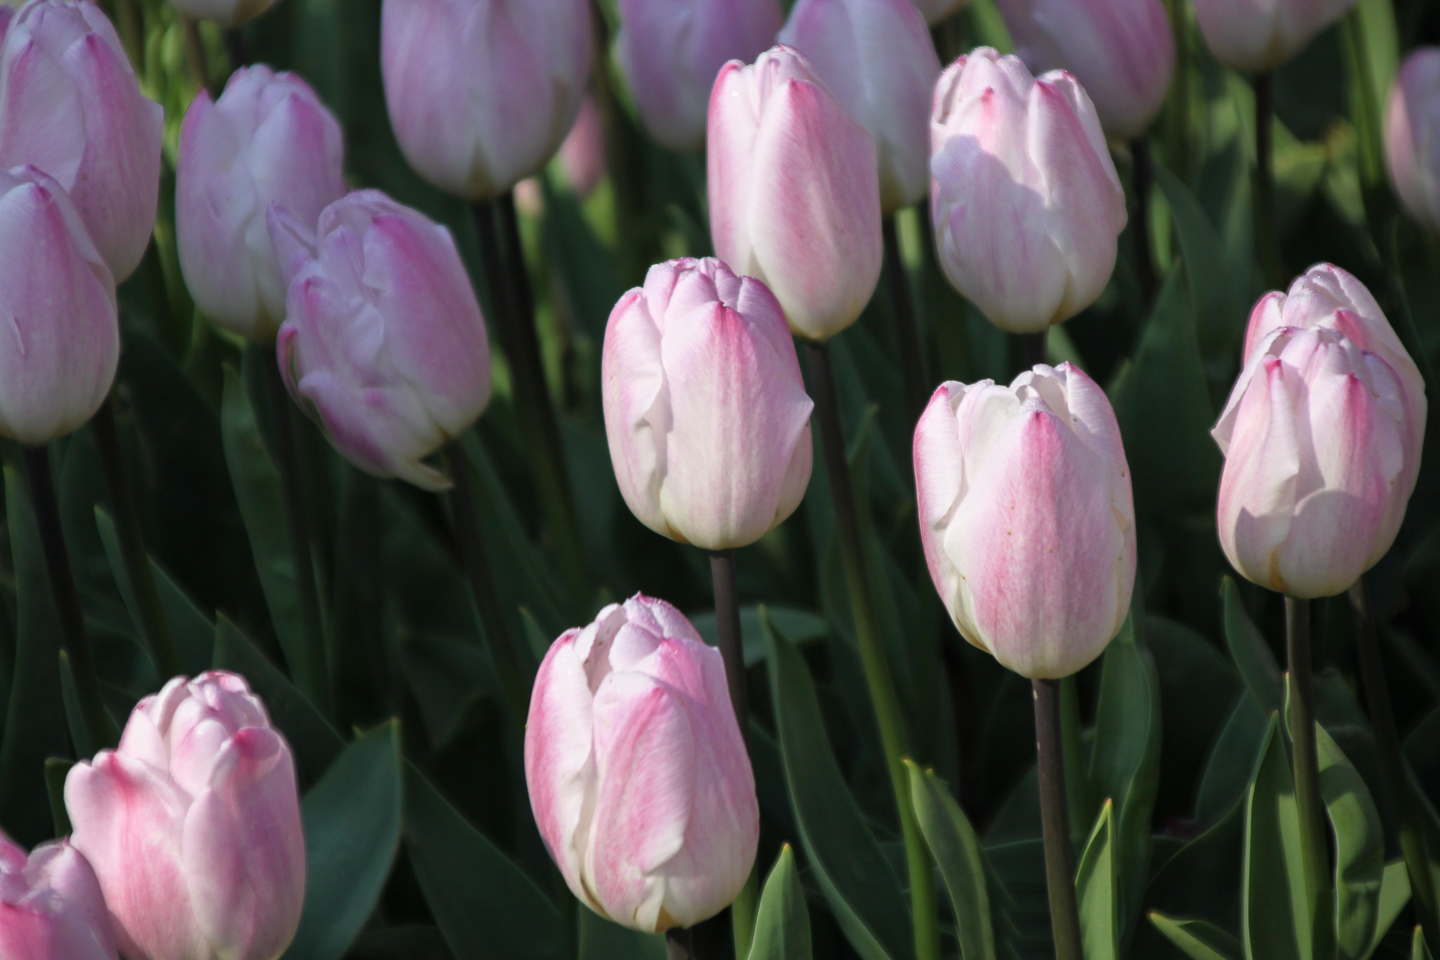 Pink and white tulips growing in the garden